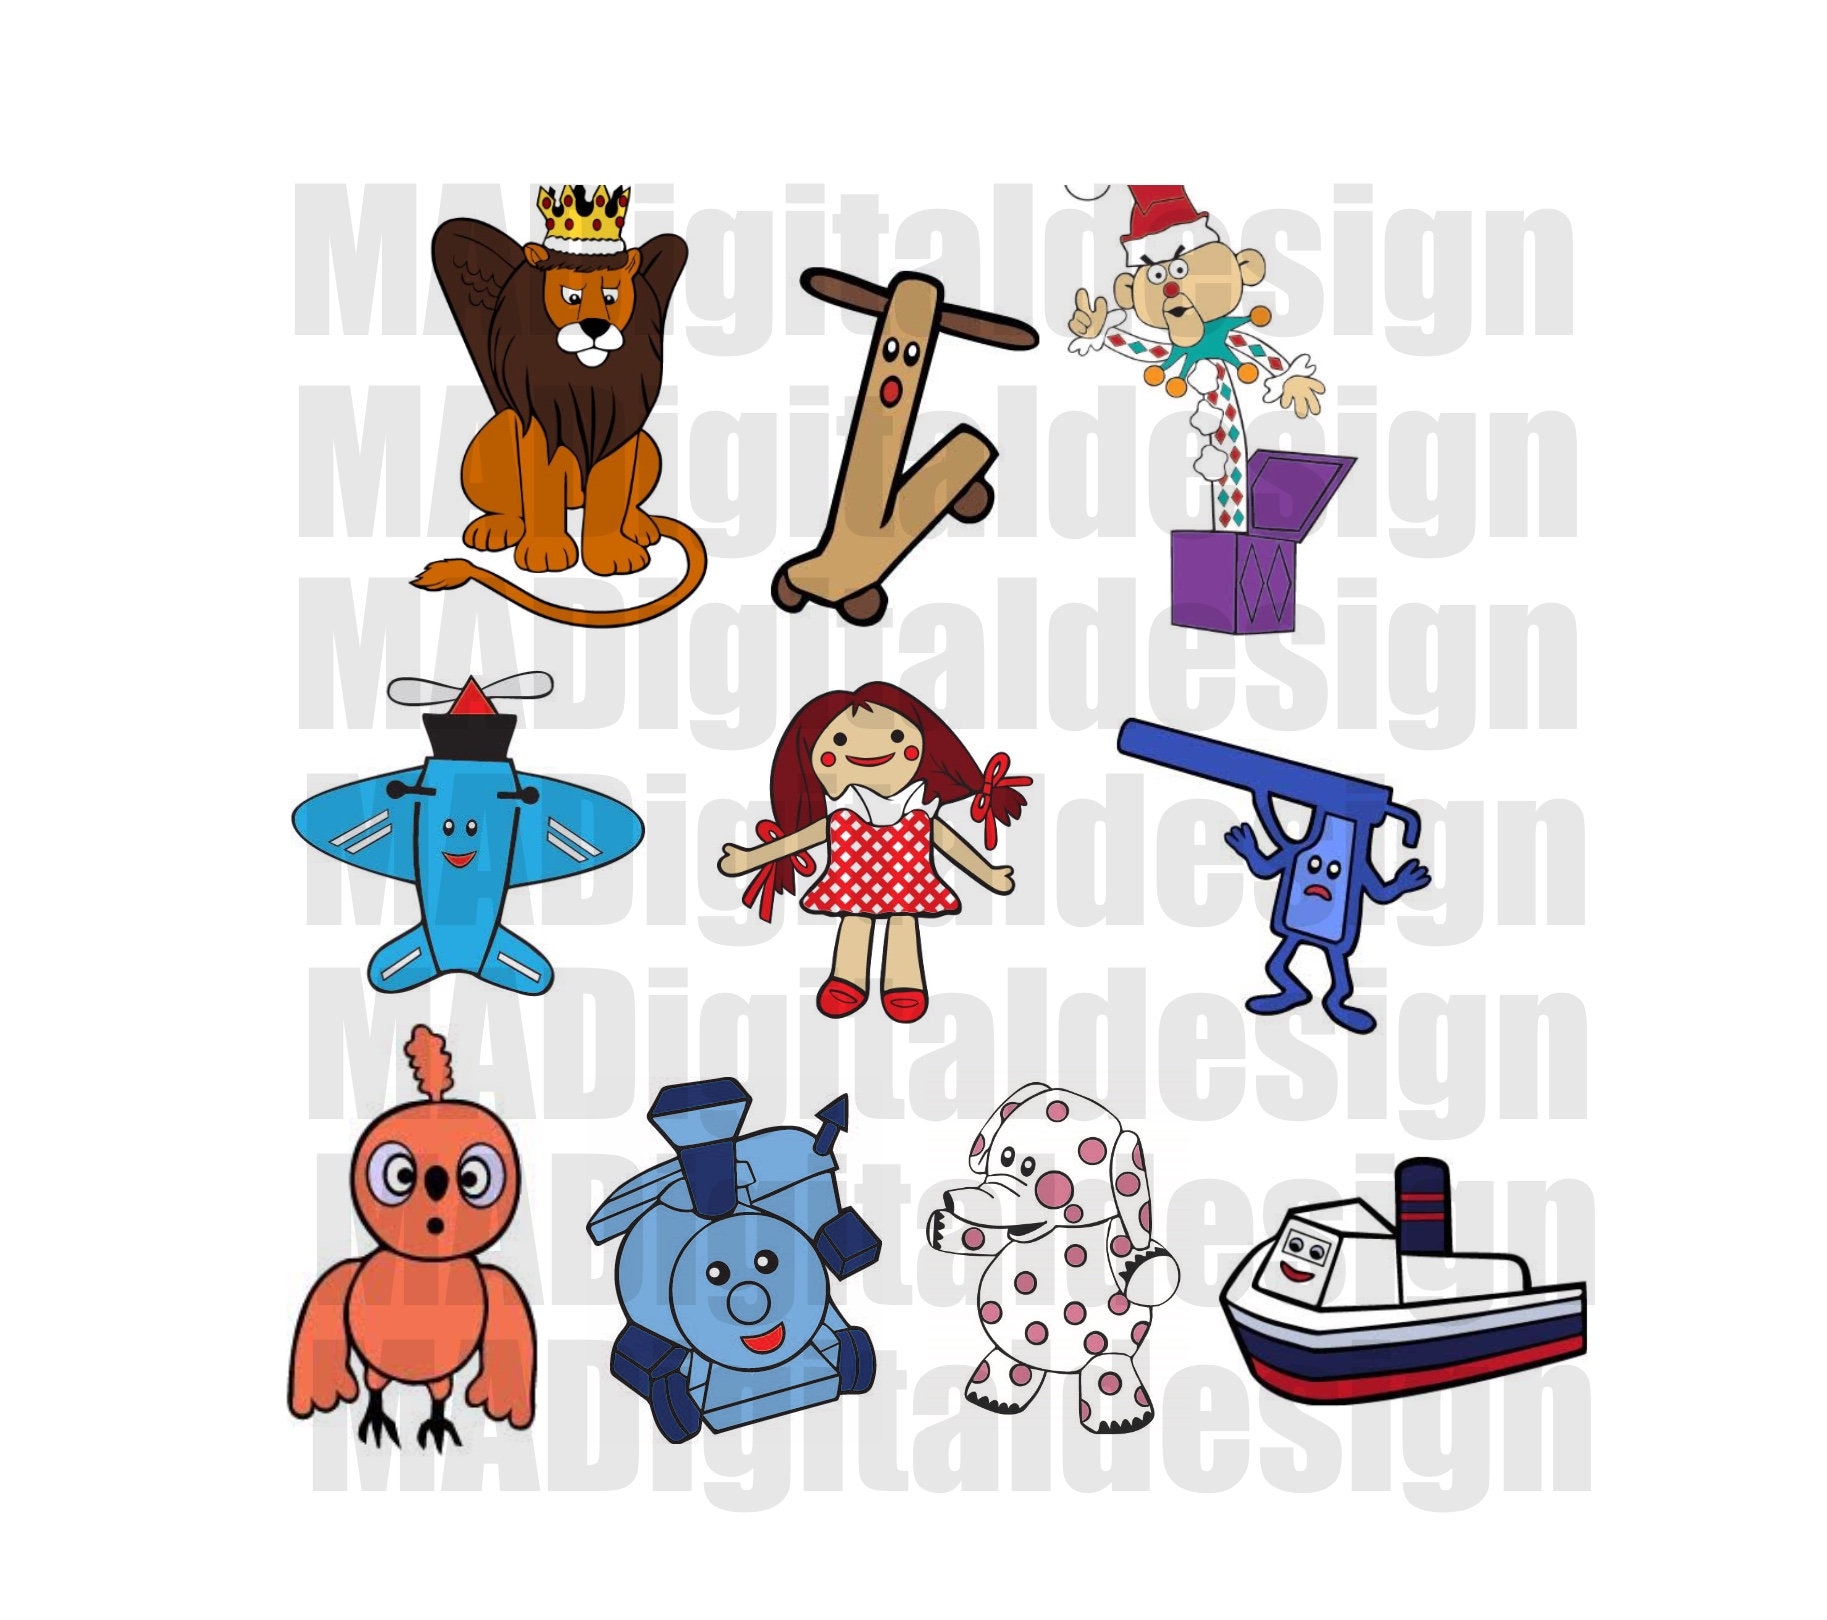 Island of misfit toys image mega bundle with lion elephant dolly charlie airplane train bird boat scooter jelly gun svg png jpeg